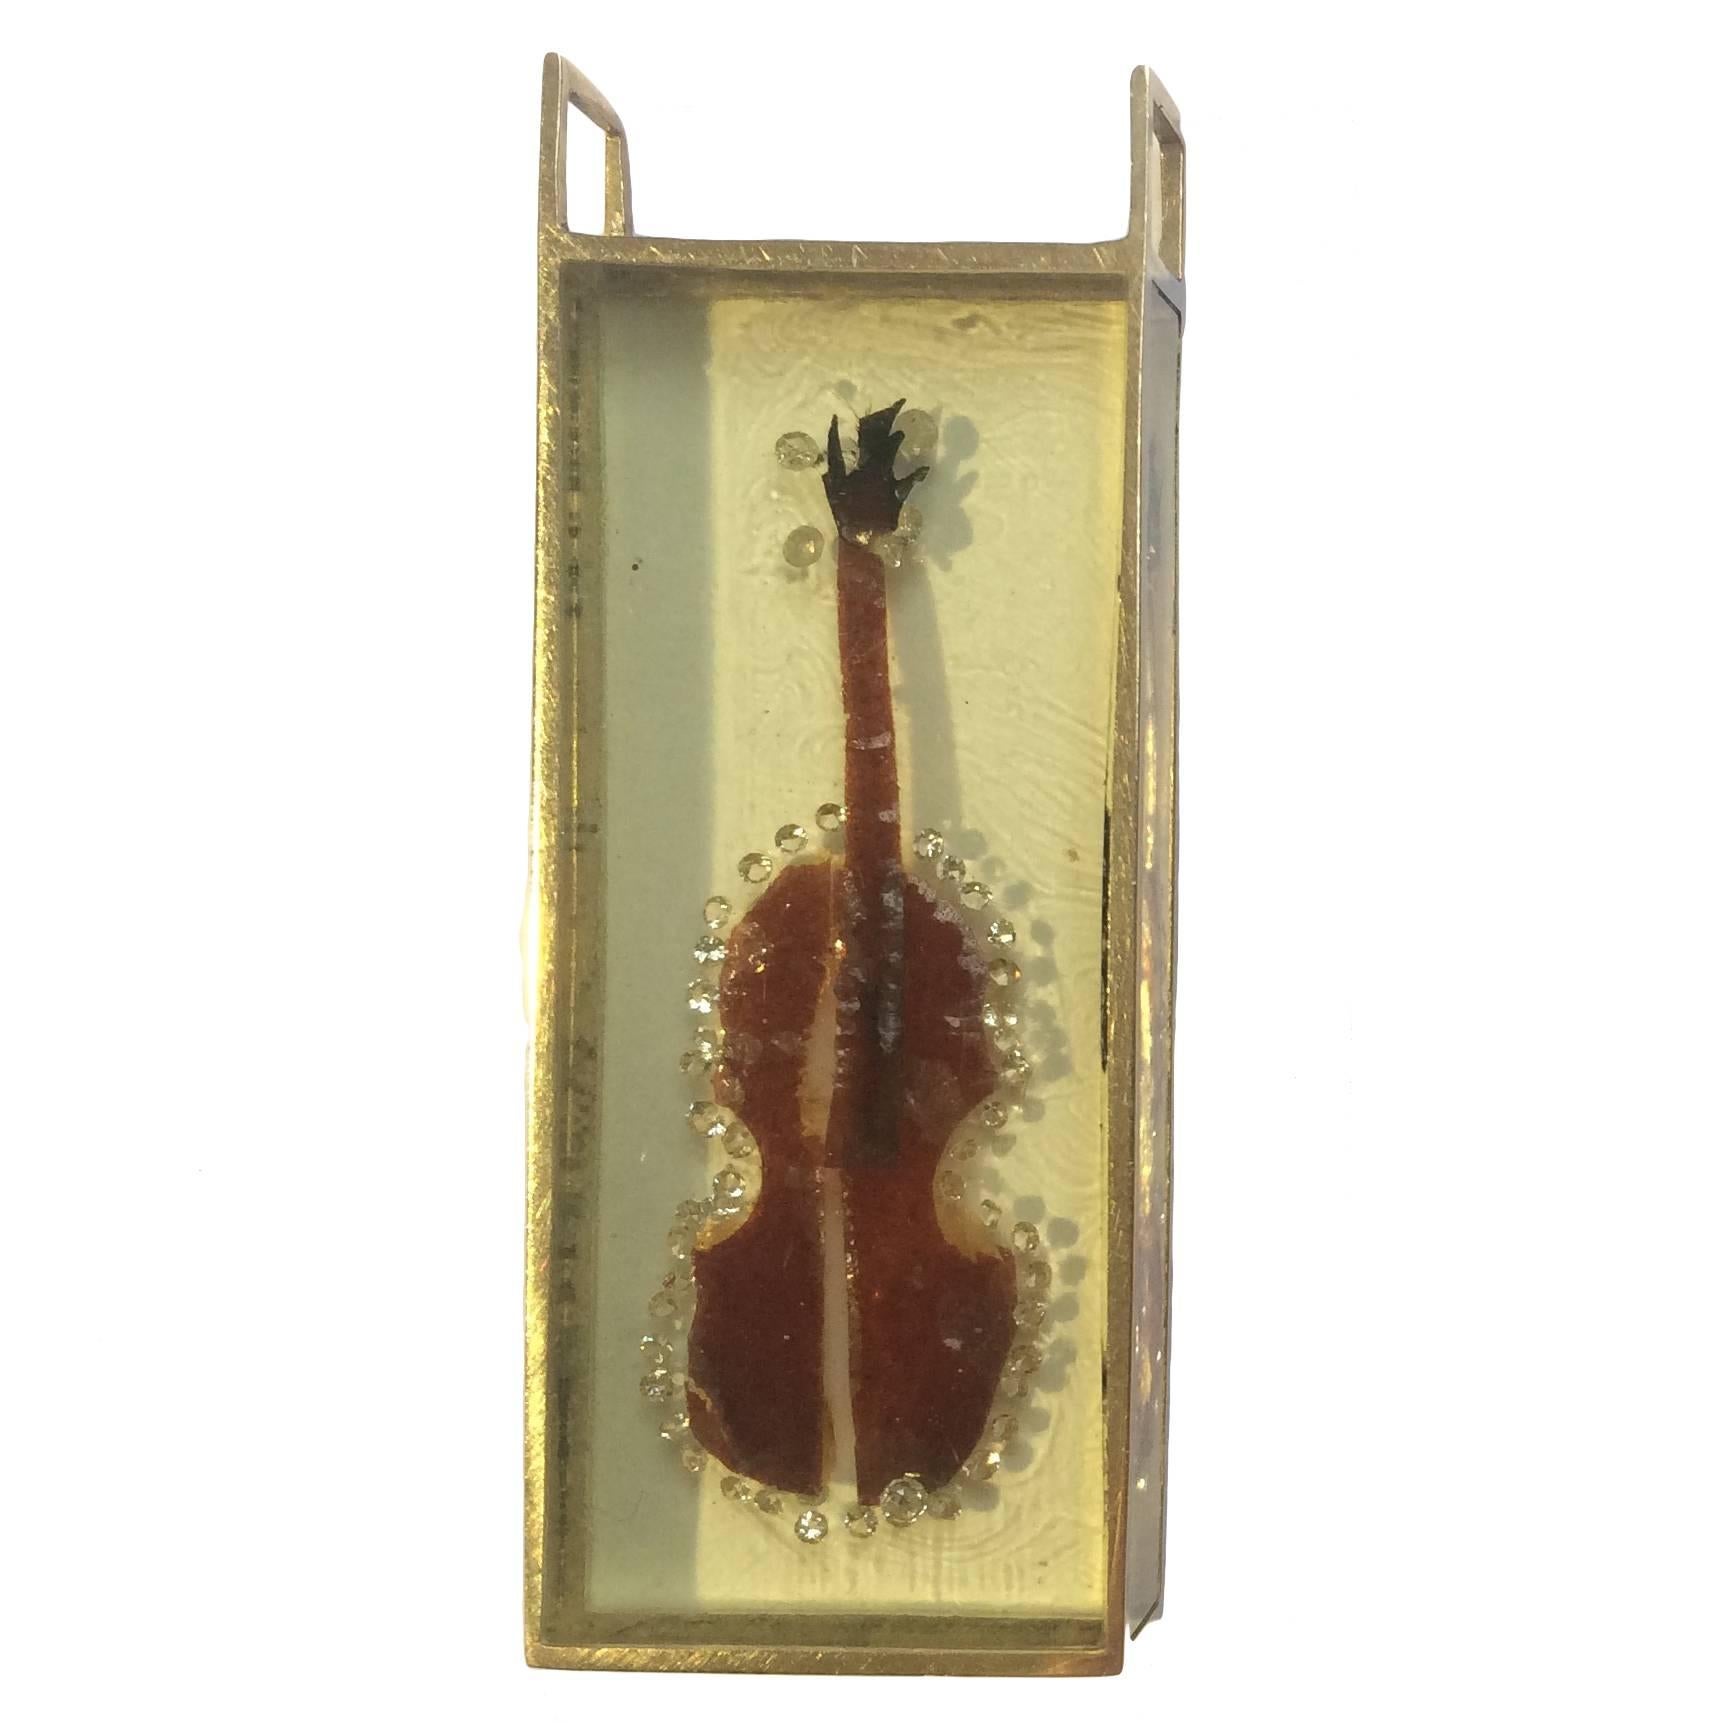 Hand made pendant by Arman in 1973.
Yellow gold casing cutout violin shape from varied beetle species with diamonds embedded in resin.
Unique

Arman is a painter who moved from using objects for the ink or paint traces they leave (